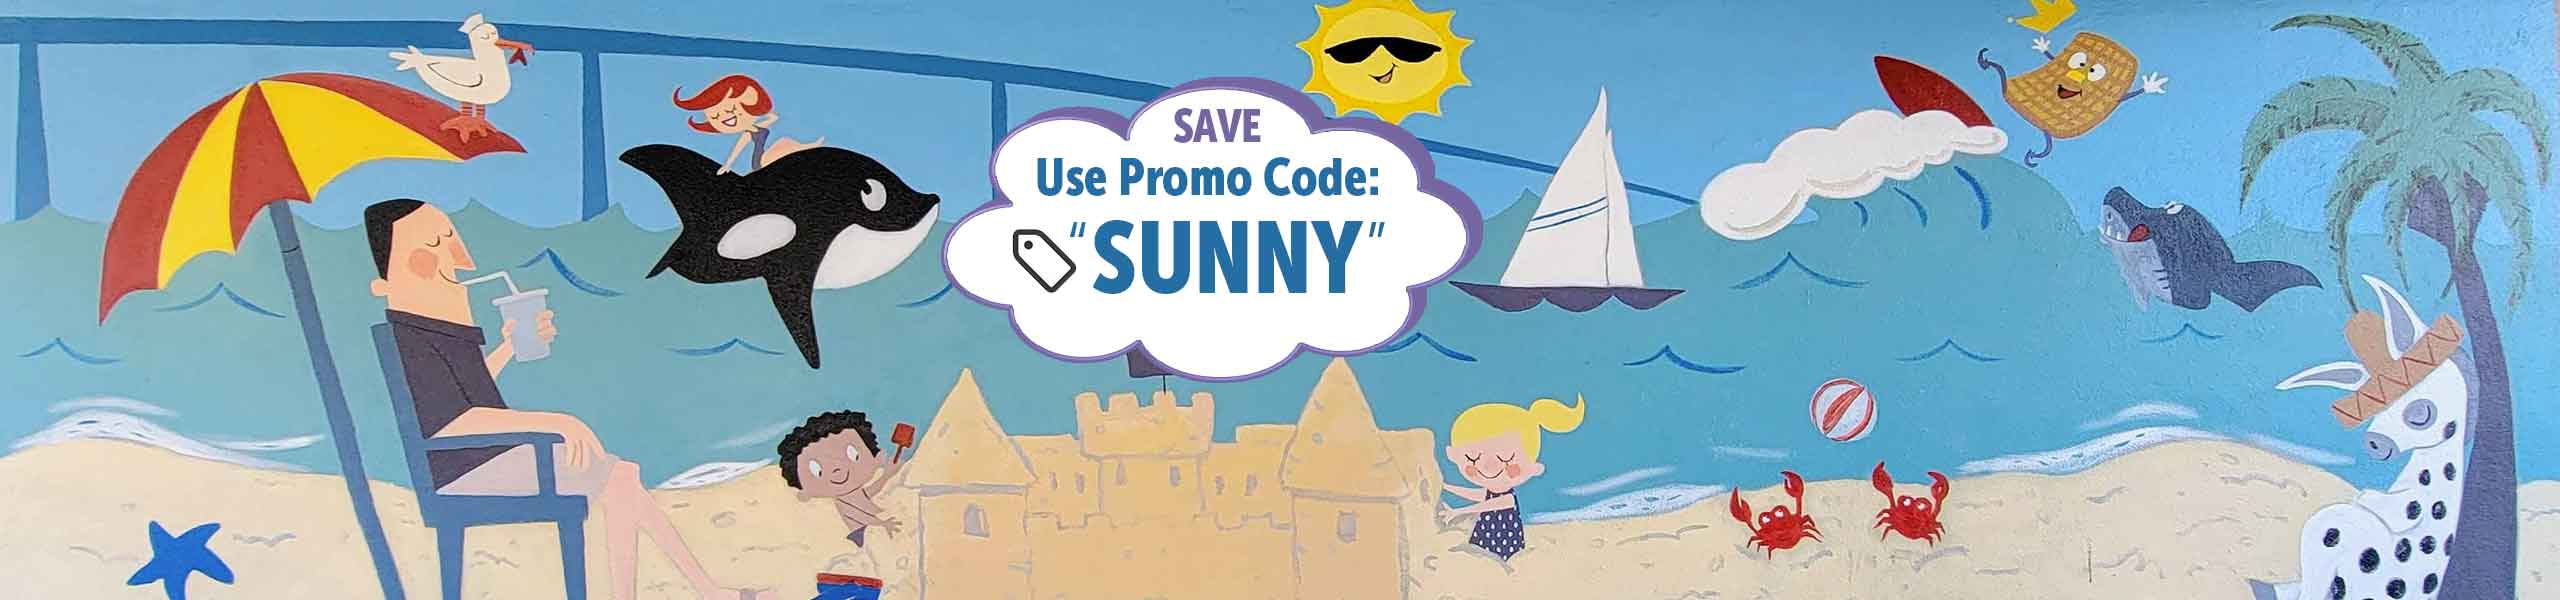 For a Limited Time SAVE up to 25% with Promo Code "SUNNY"